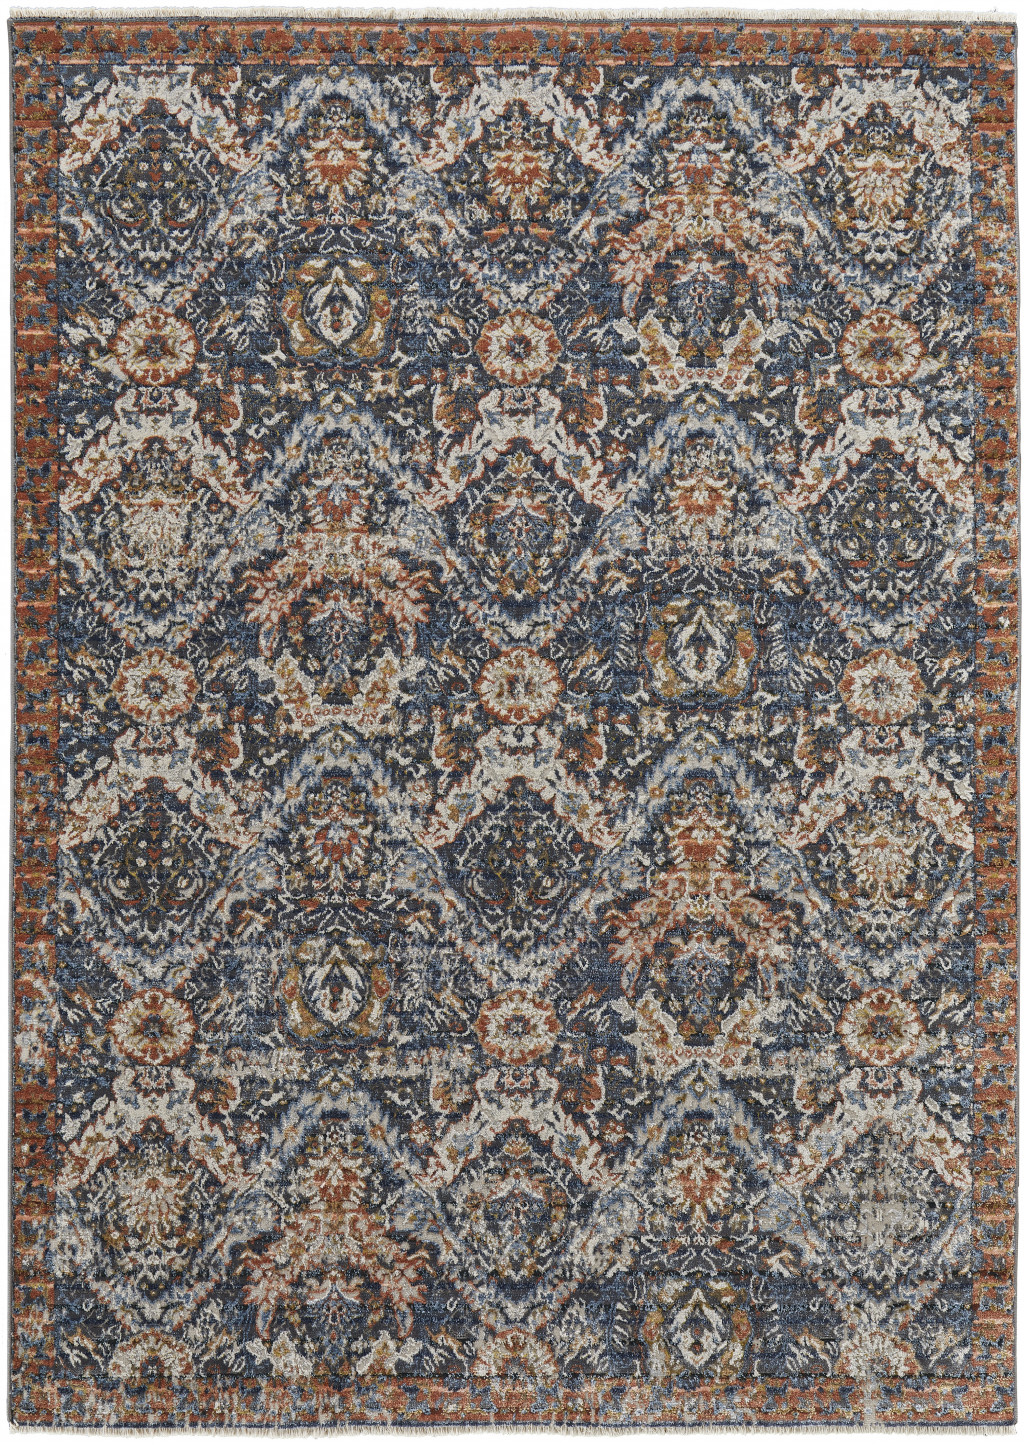 10' X 13' Blue Orange And Ivory Floral Power Loom Area Rug With Fringe-513992-1